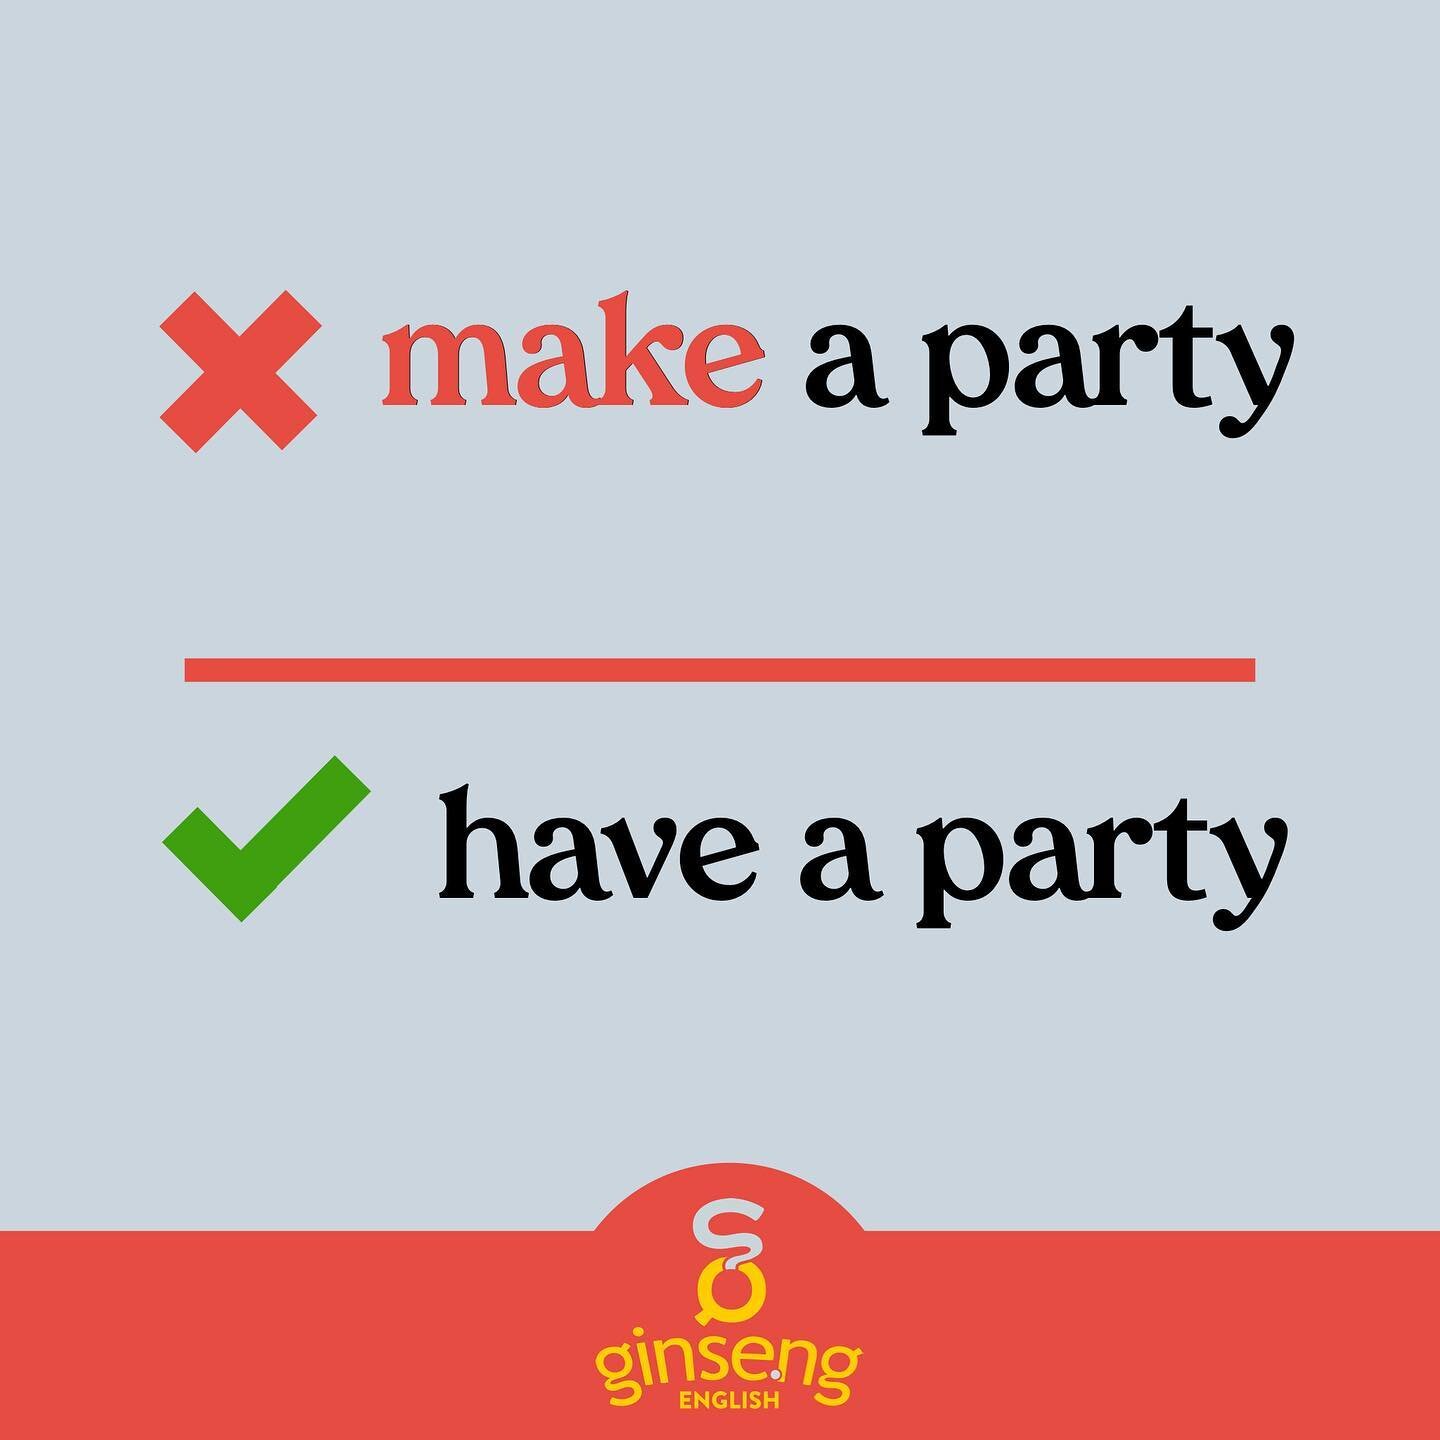 CAREFUL!⁣⁣
⁣⁣
There are lots of phrases with DO, MAKE, and HAVE that don&rsquo;t work the way you might expect! If you say &ldquo;make a party&rdquo; people will understand, but it&rsquo;s not what we would typically say. We say &ldquo;have a party.&